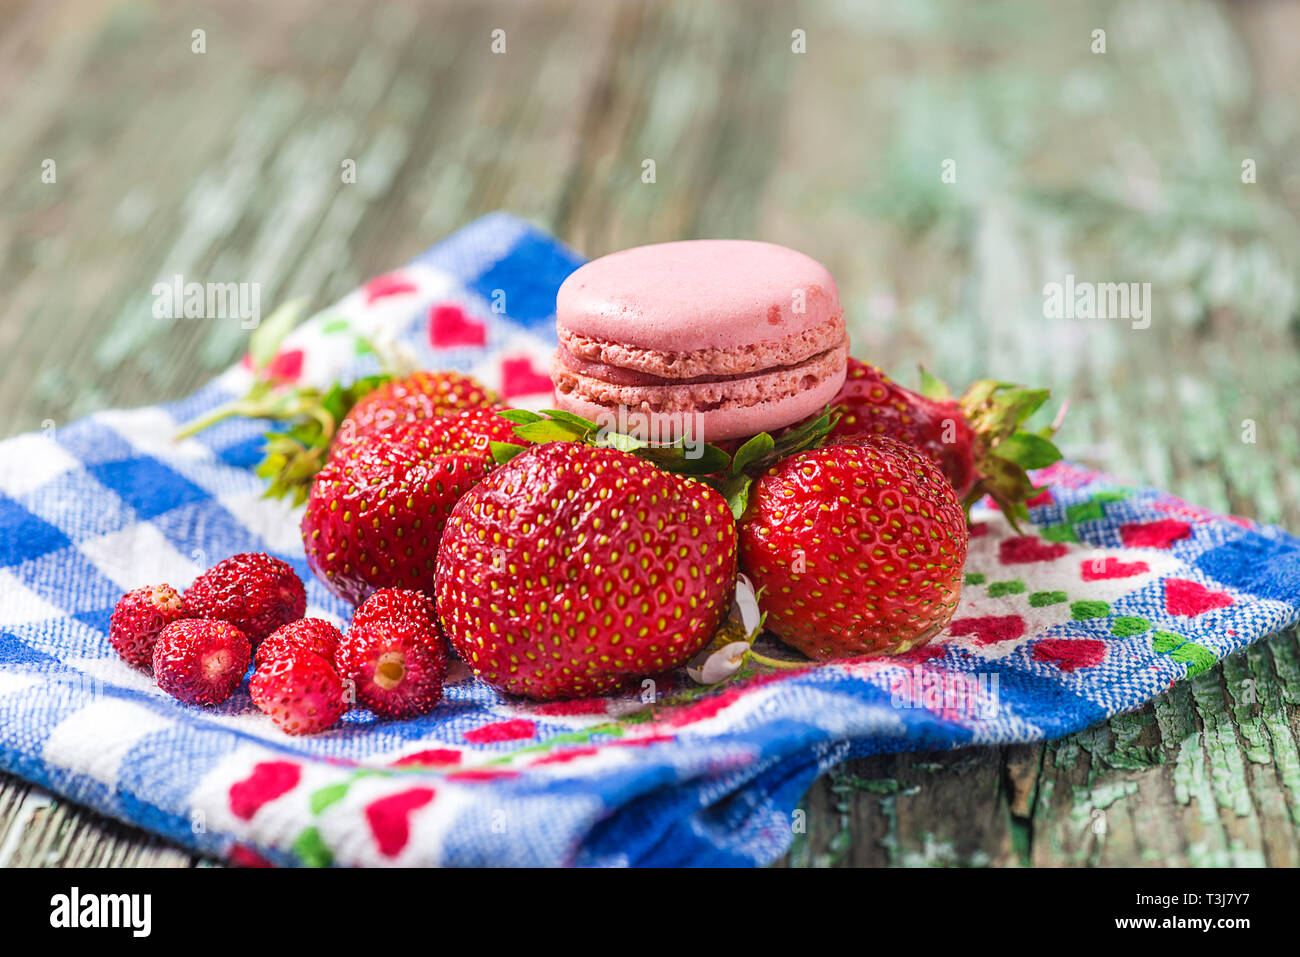 Delicious strawberries and macaroon Stock Photo